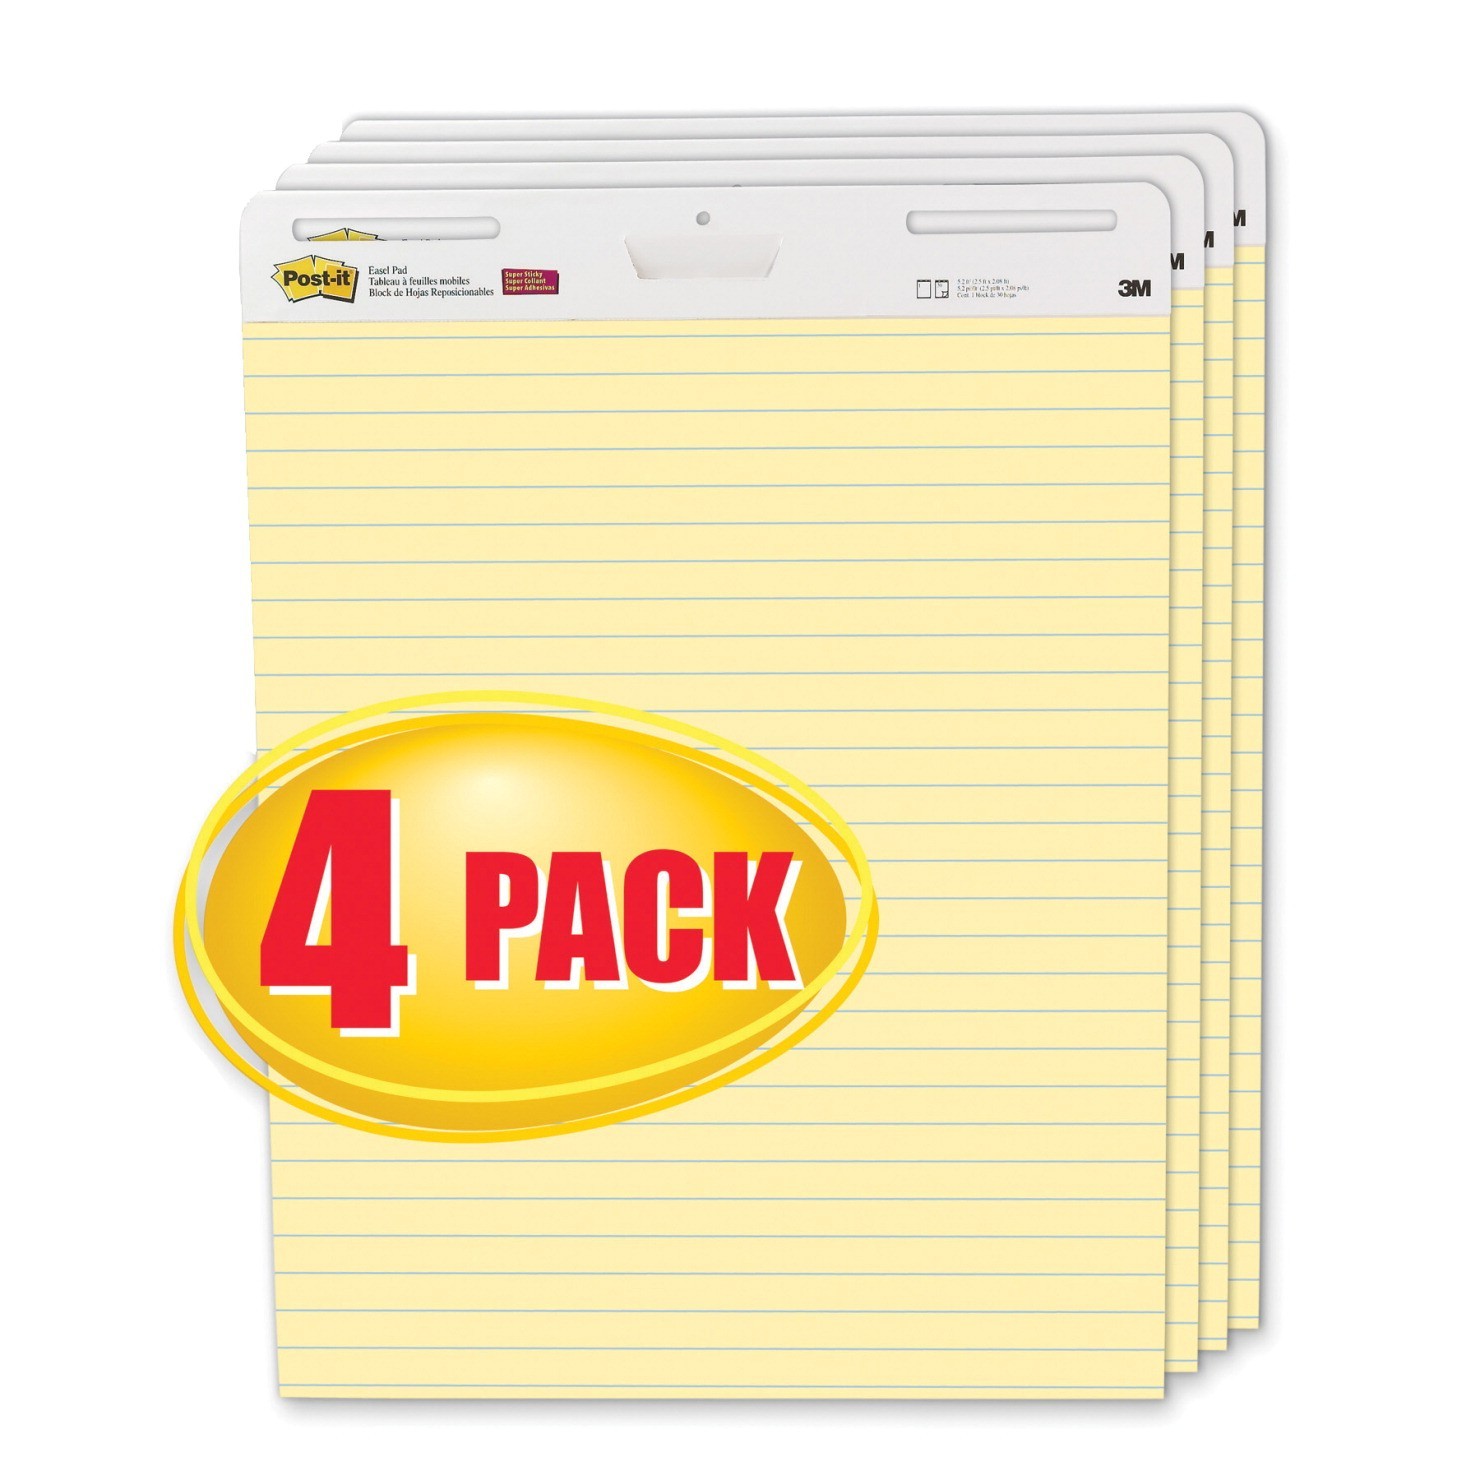 25 X 30 Post-it Lined Easel Pads, 30 Sheets/Pad - 4/Pkg